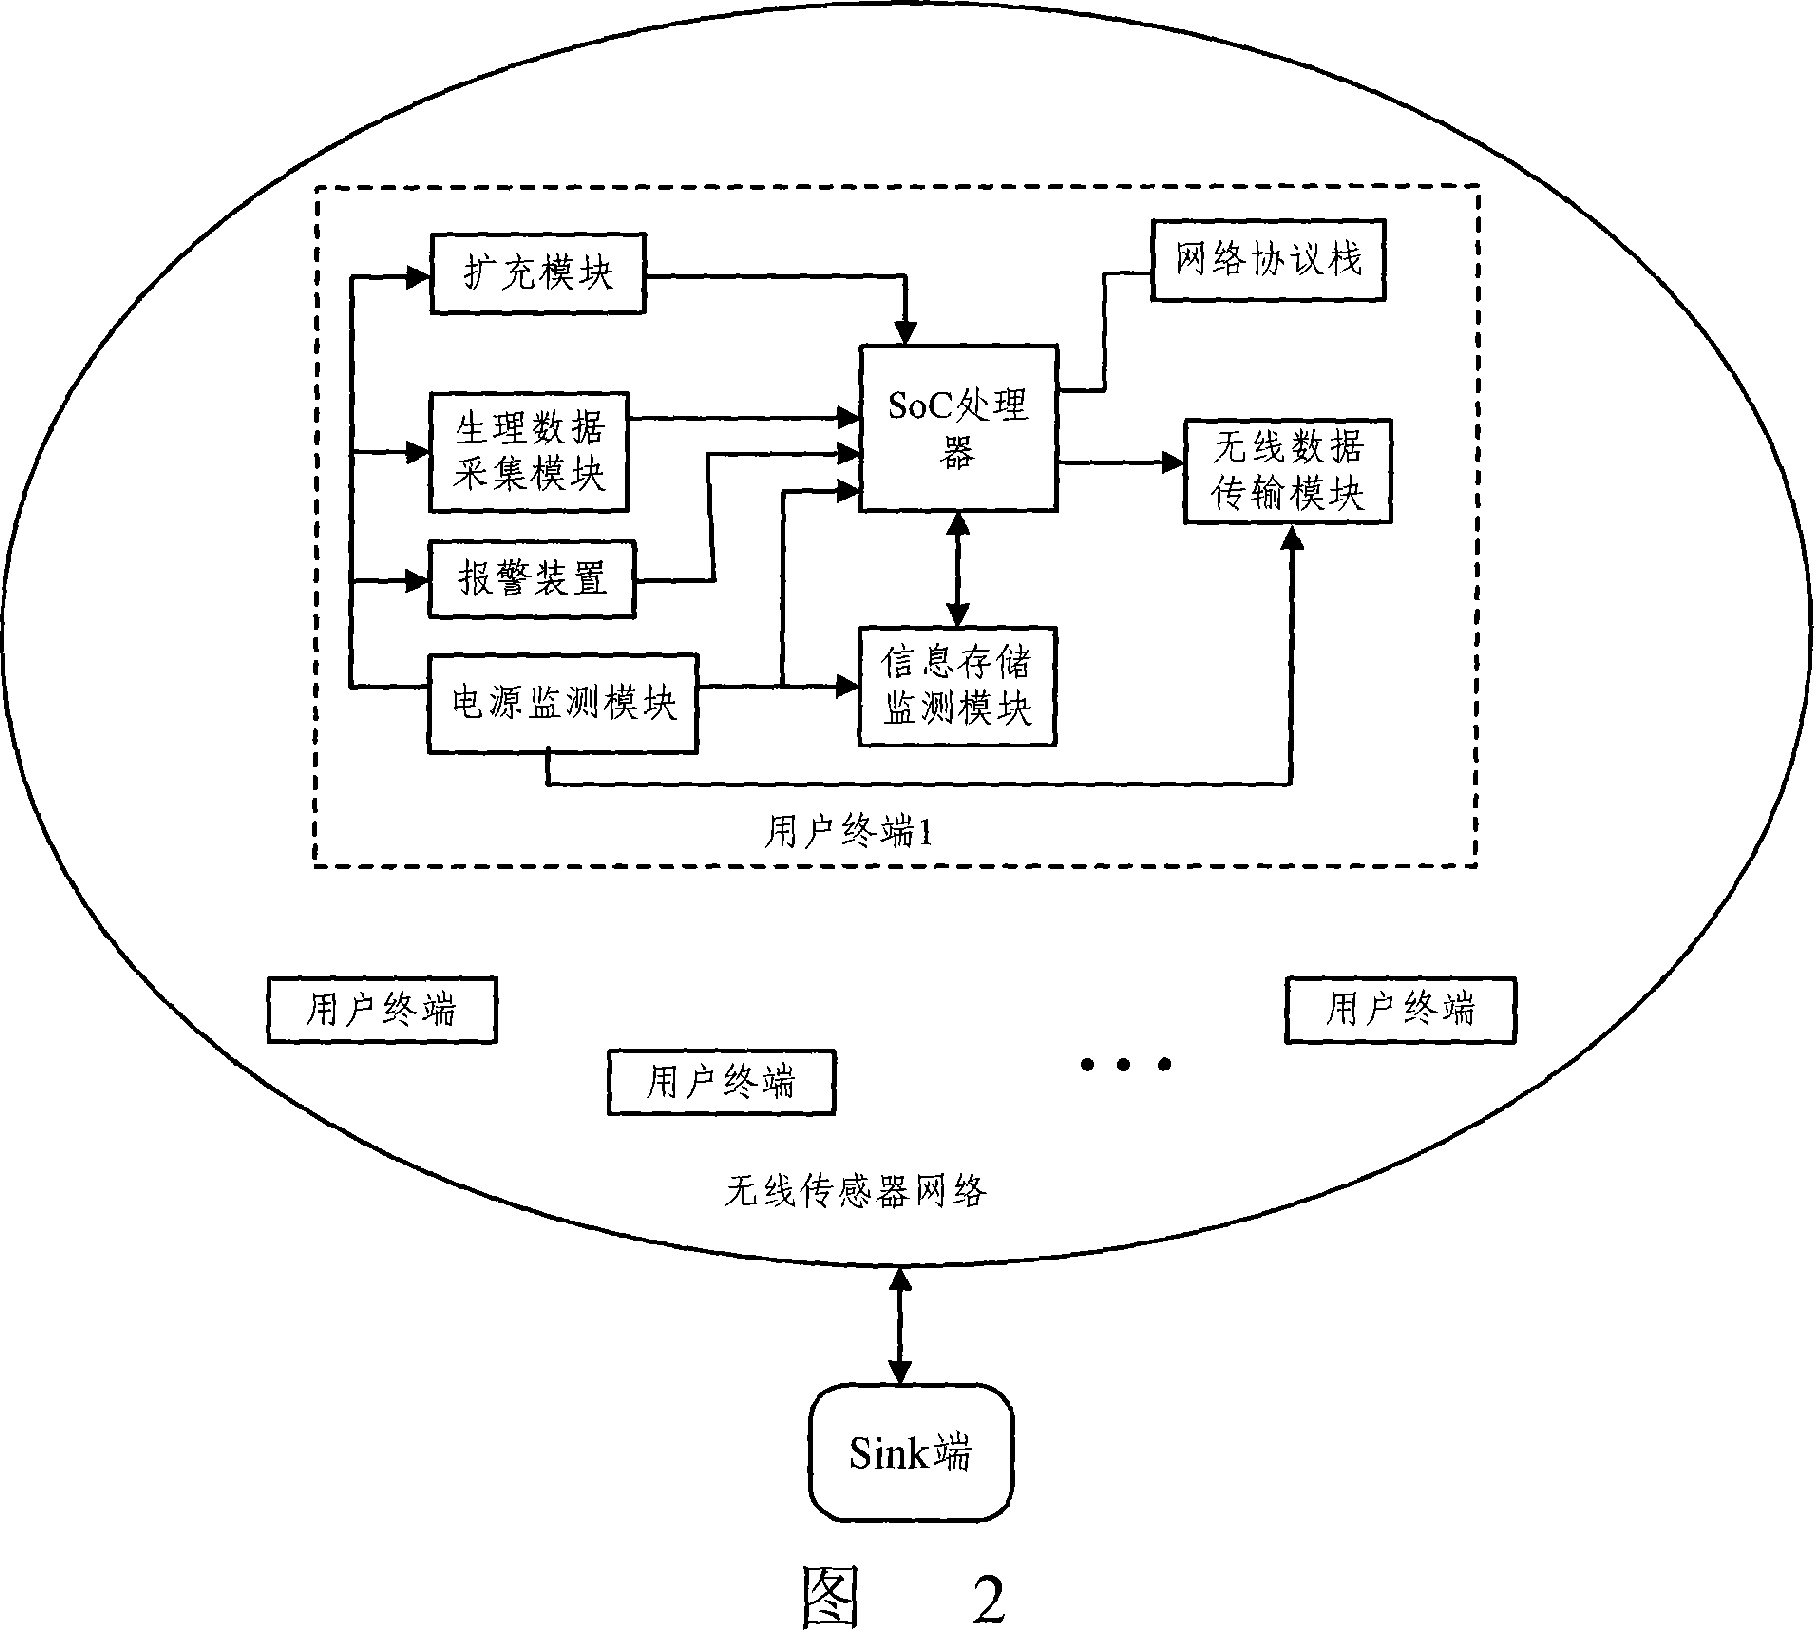 Digital-signal intelligent monitoring method and application system thereof